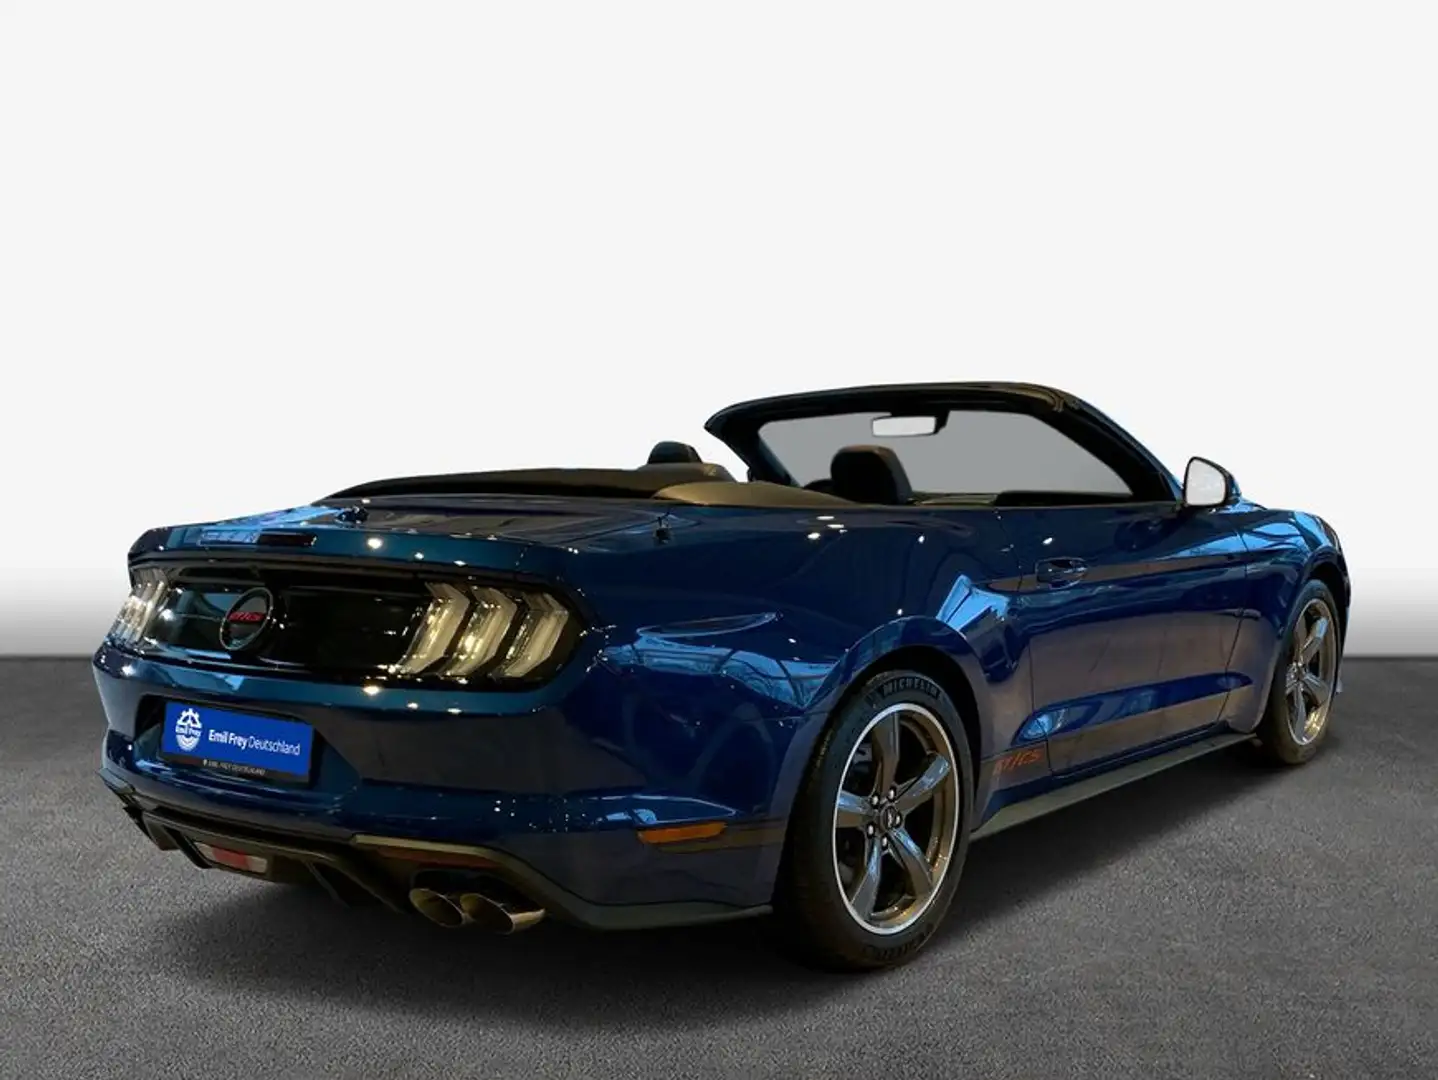 Ford Mustang Convertible 5.0 Ti-VCT V8 Aut. GT 330 kW, Blau - 2